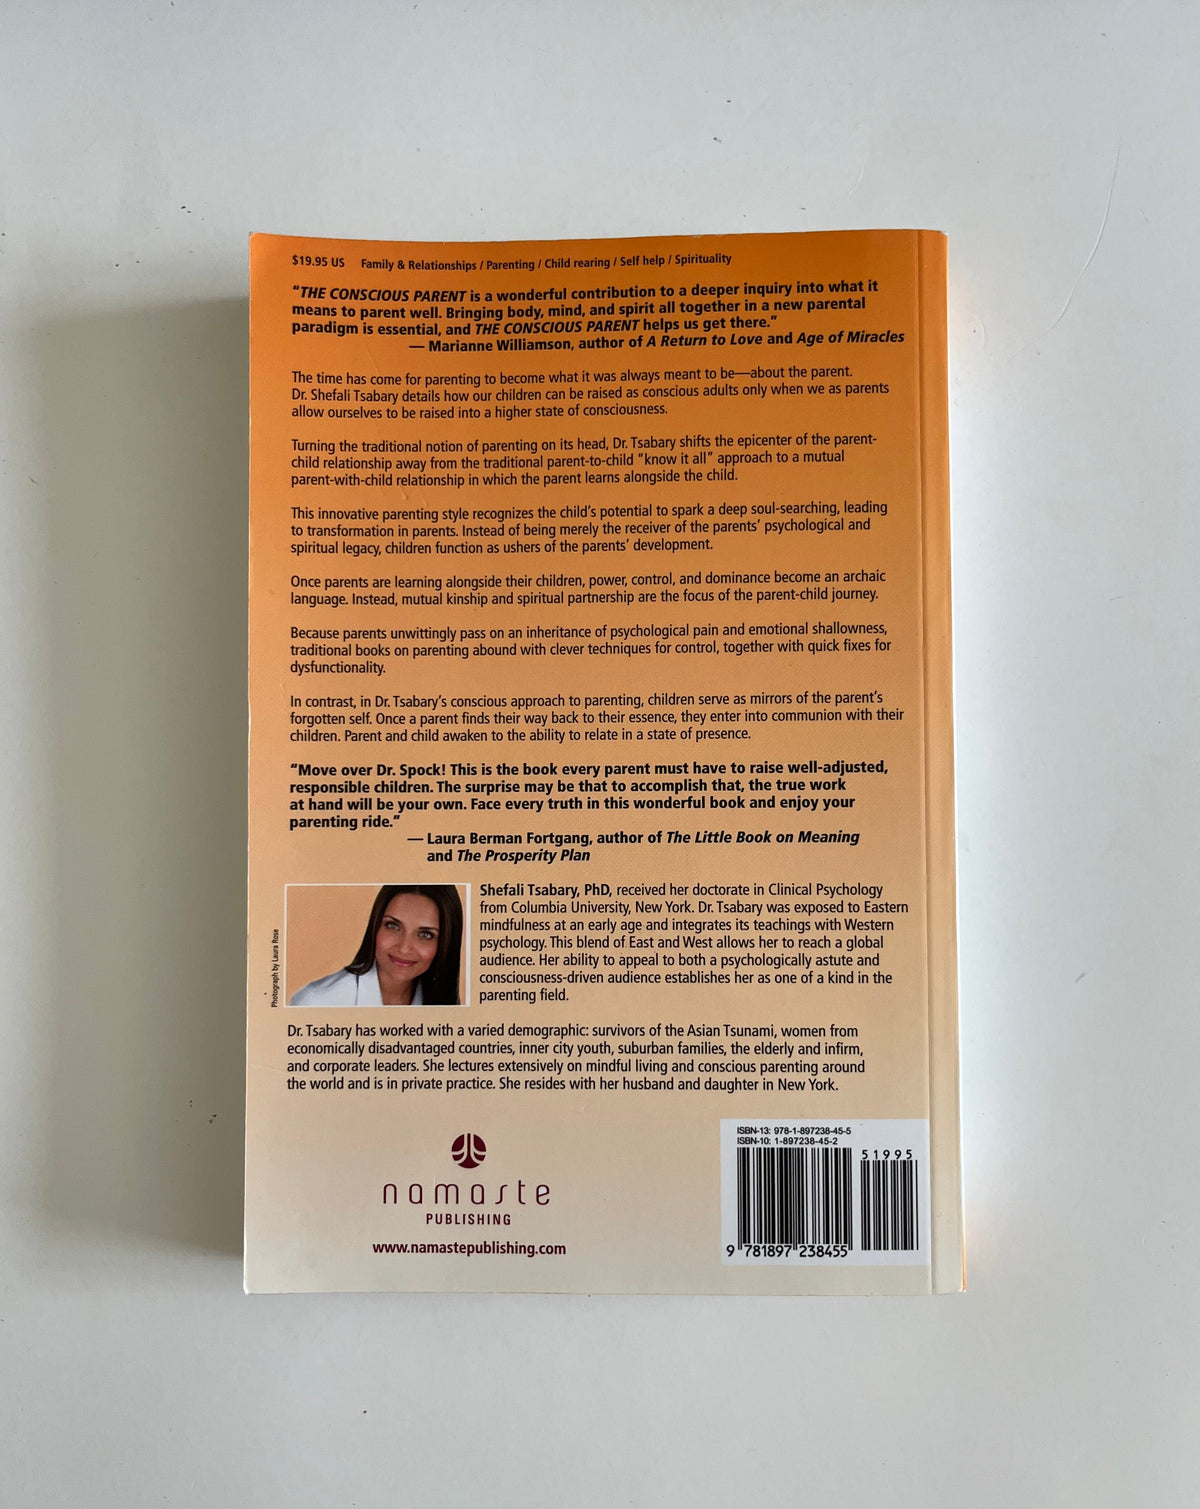 The Conscious Parent: Transforming Ourselves, Empowering Our Children by Shefali Tsabary